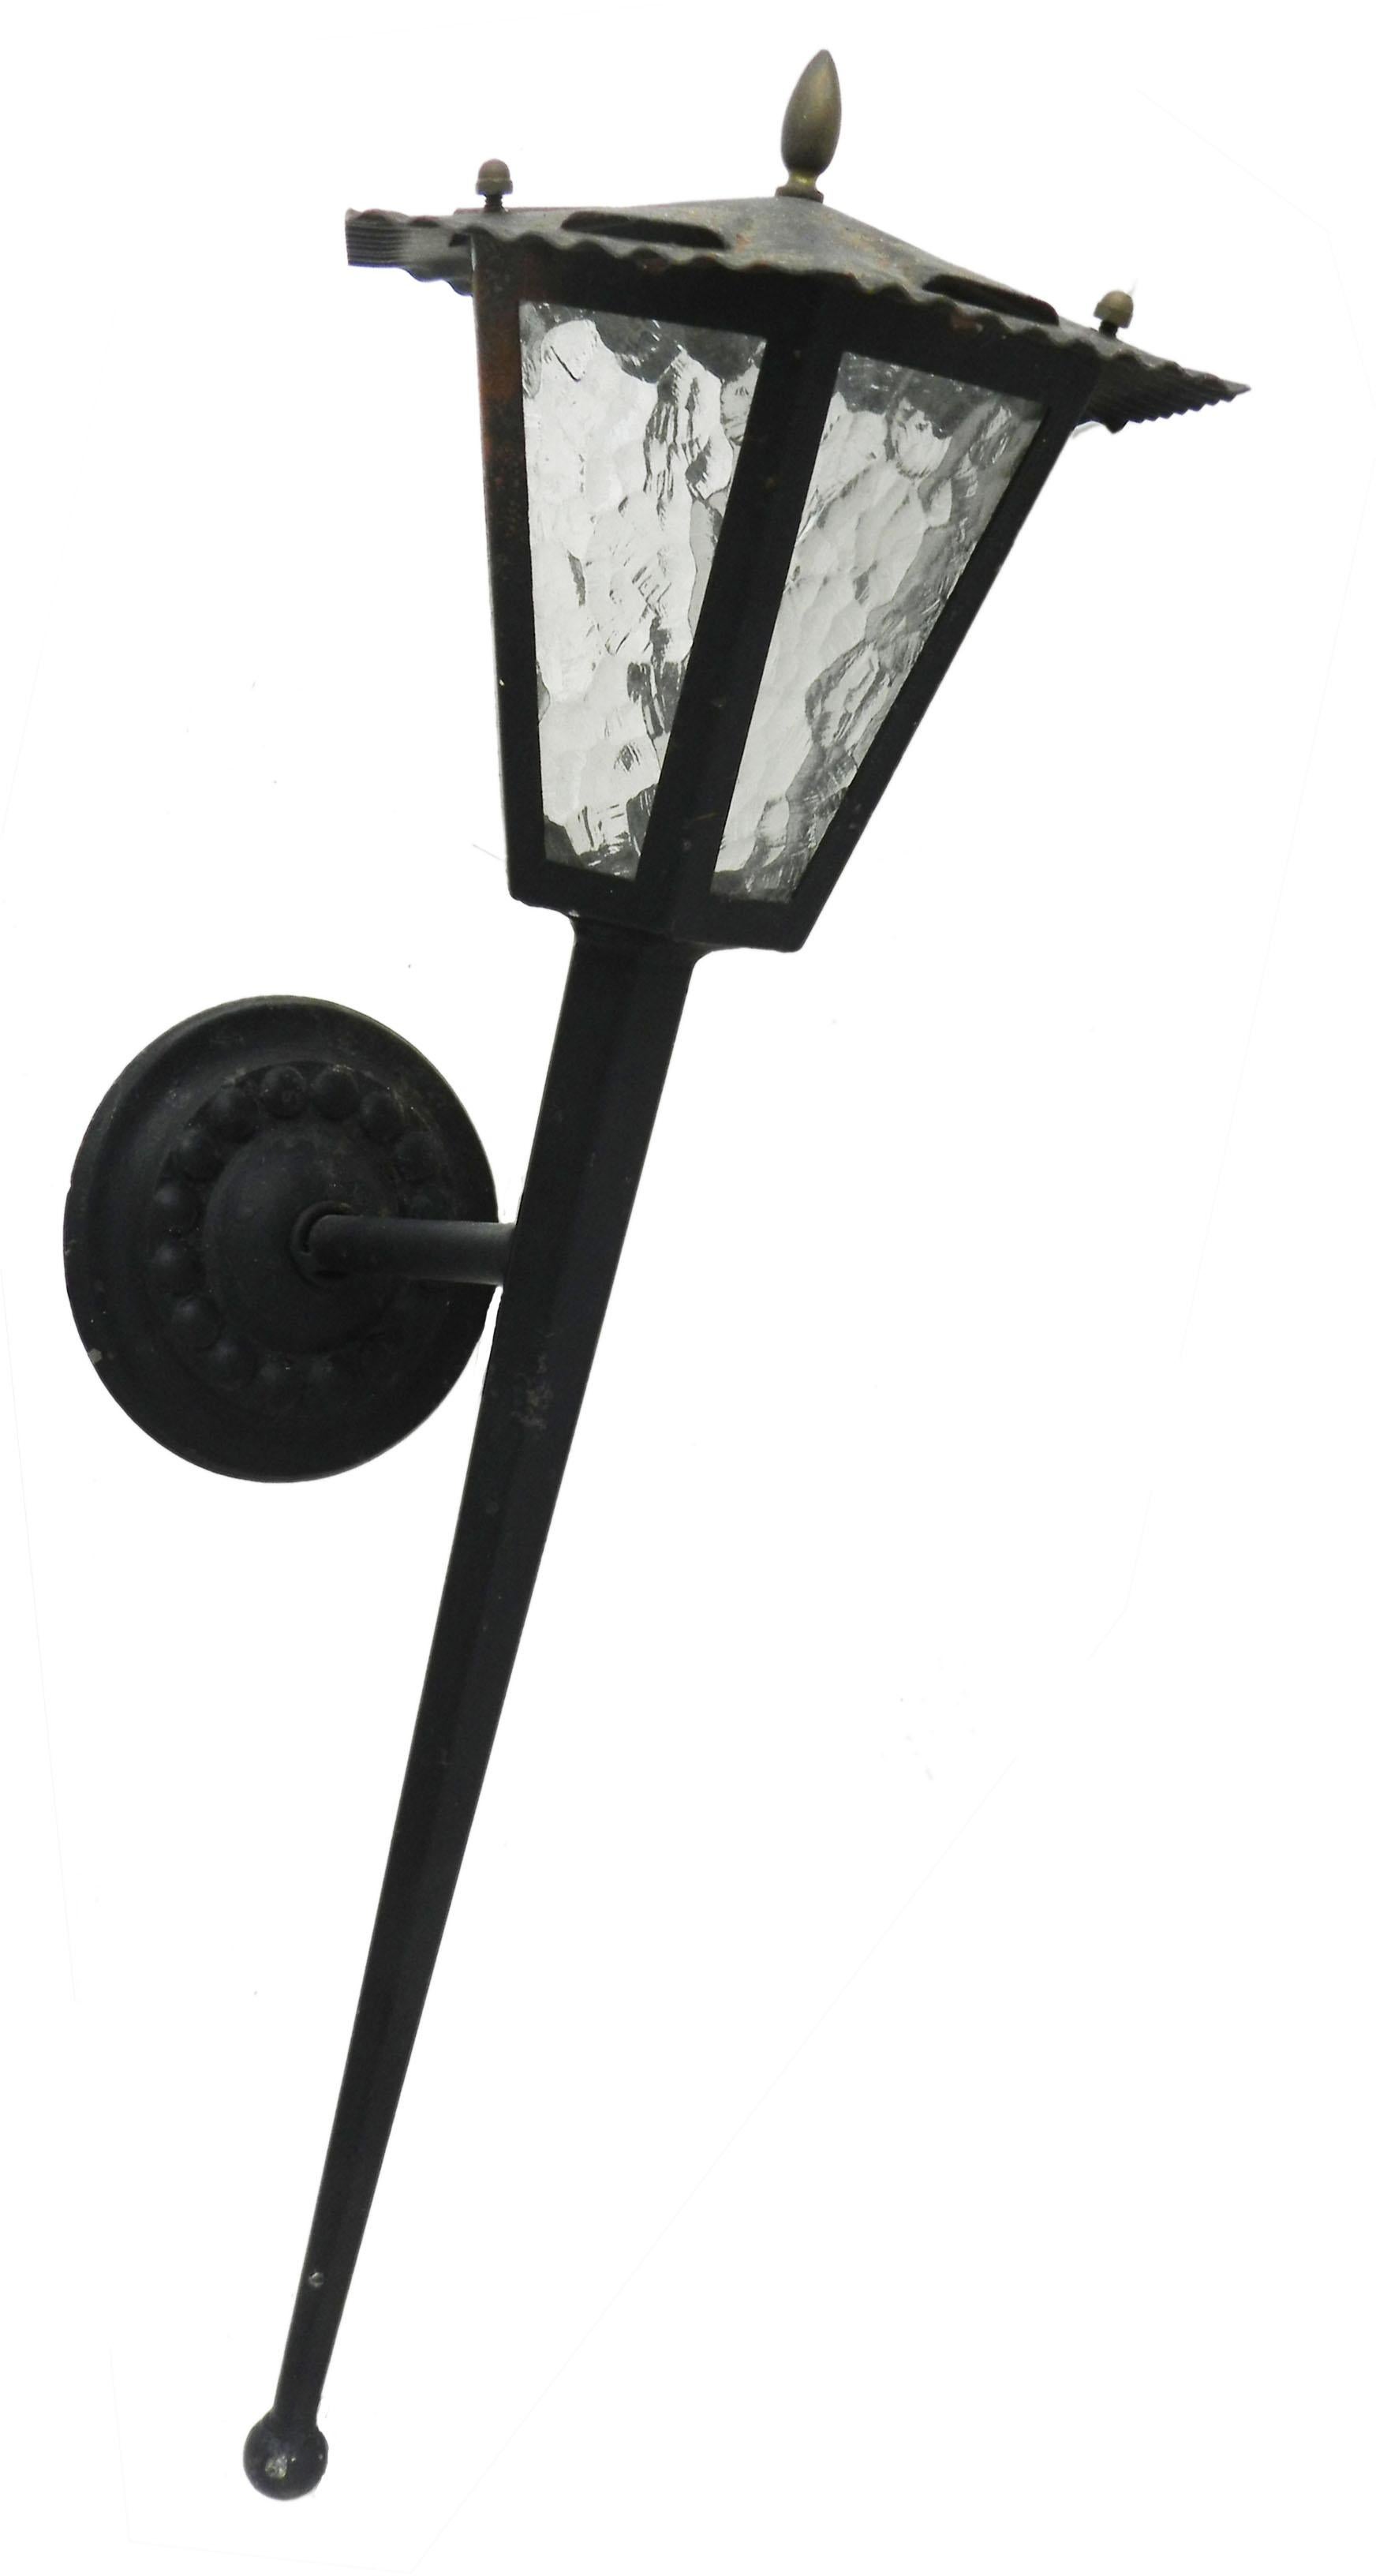 Outdoor lantern exterior porch light wrought iron glass vintage c1970
Wrought iron and glass
Shown here without light which will be added before we ship
Very sound and solid can be painted or used as is, with surface rust that isn't corrosive and